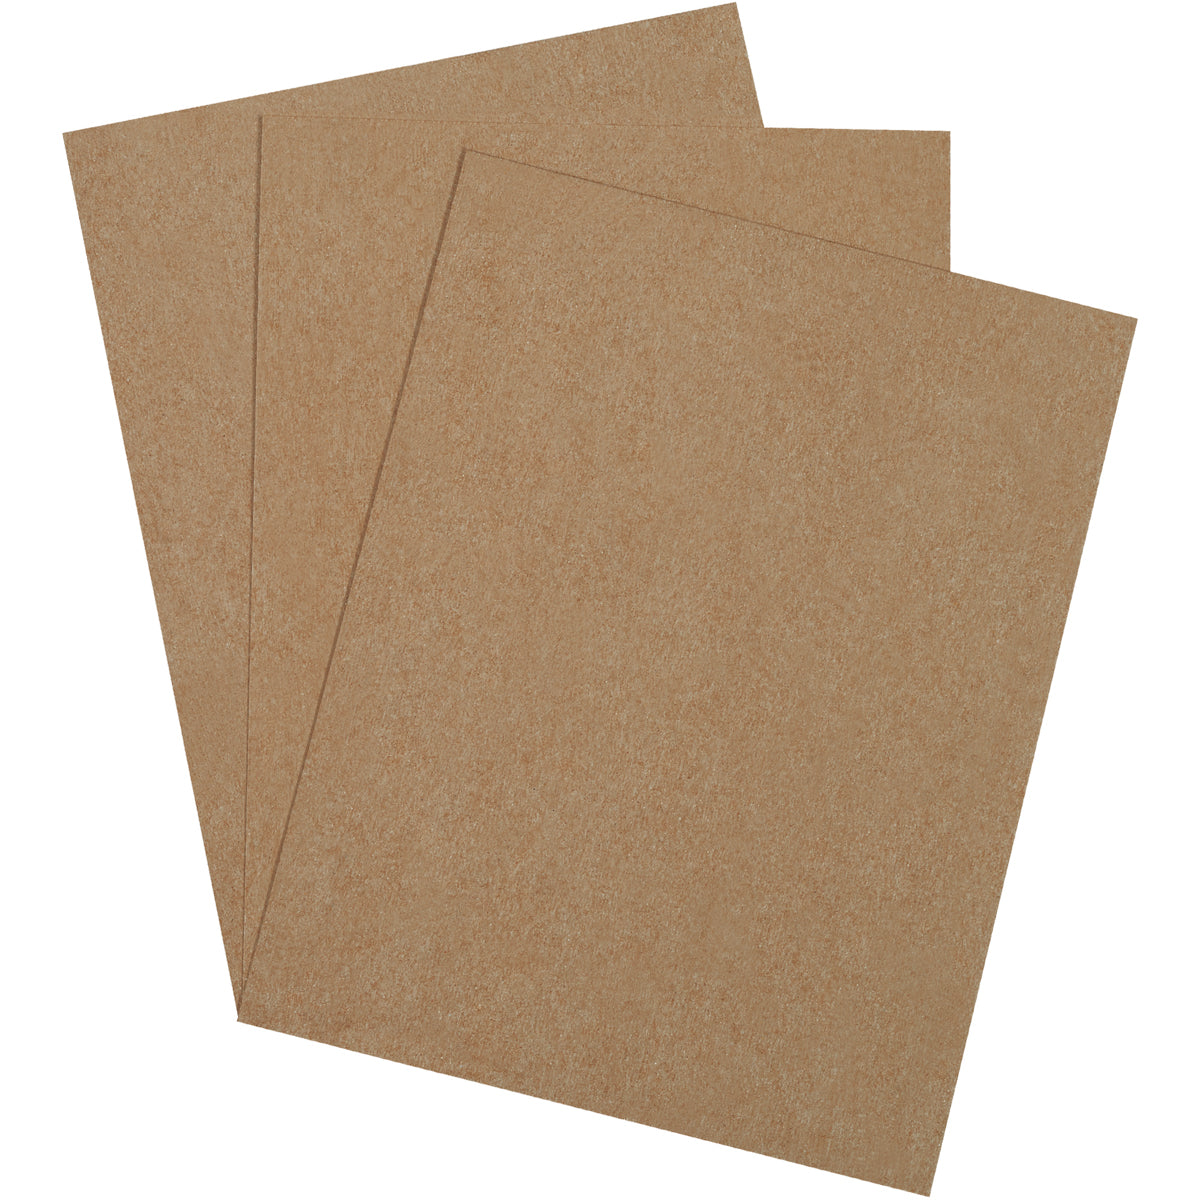 8 1/2 x 11 Chipboard Sheets (.022 Thick)